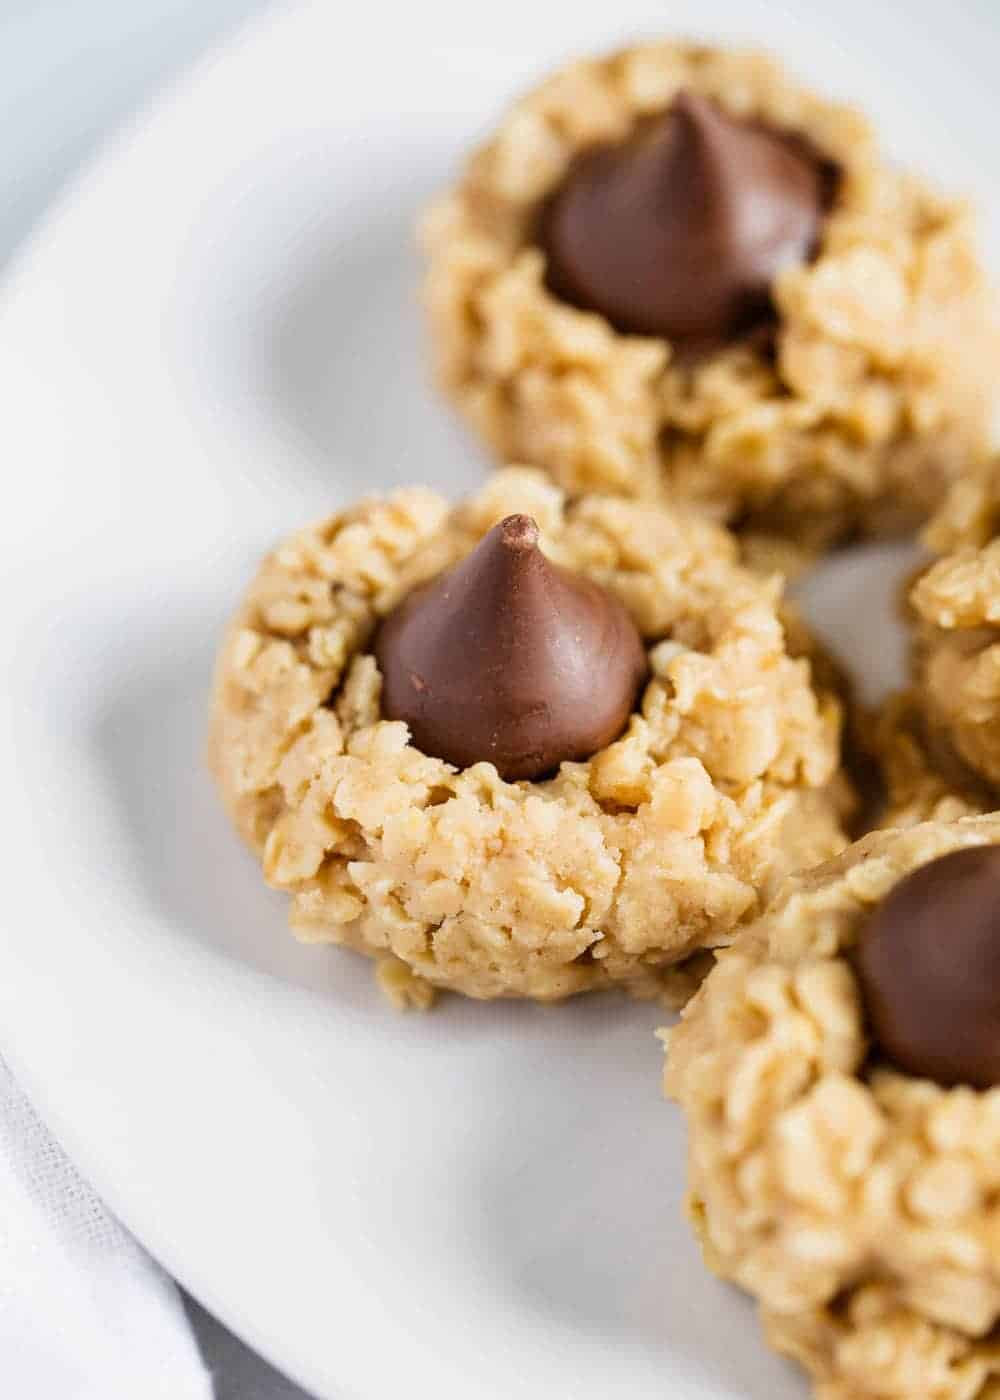 Peanut butter no bake cookies with a chocolate kiss on top.